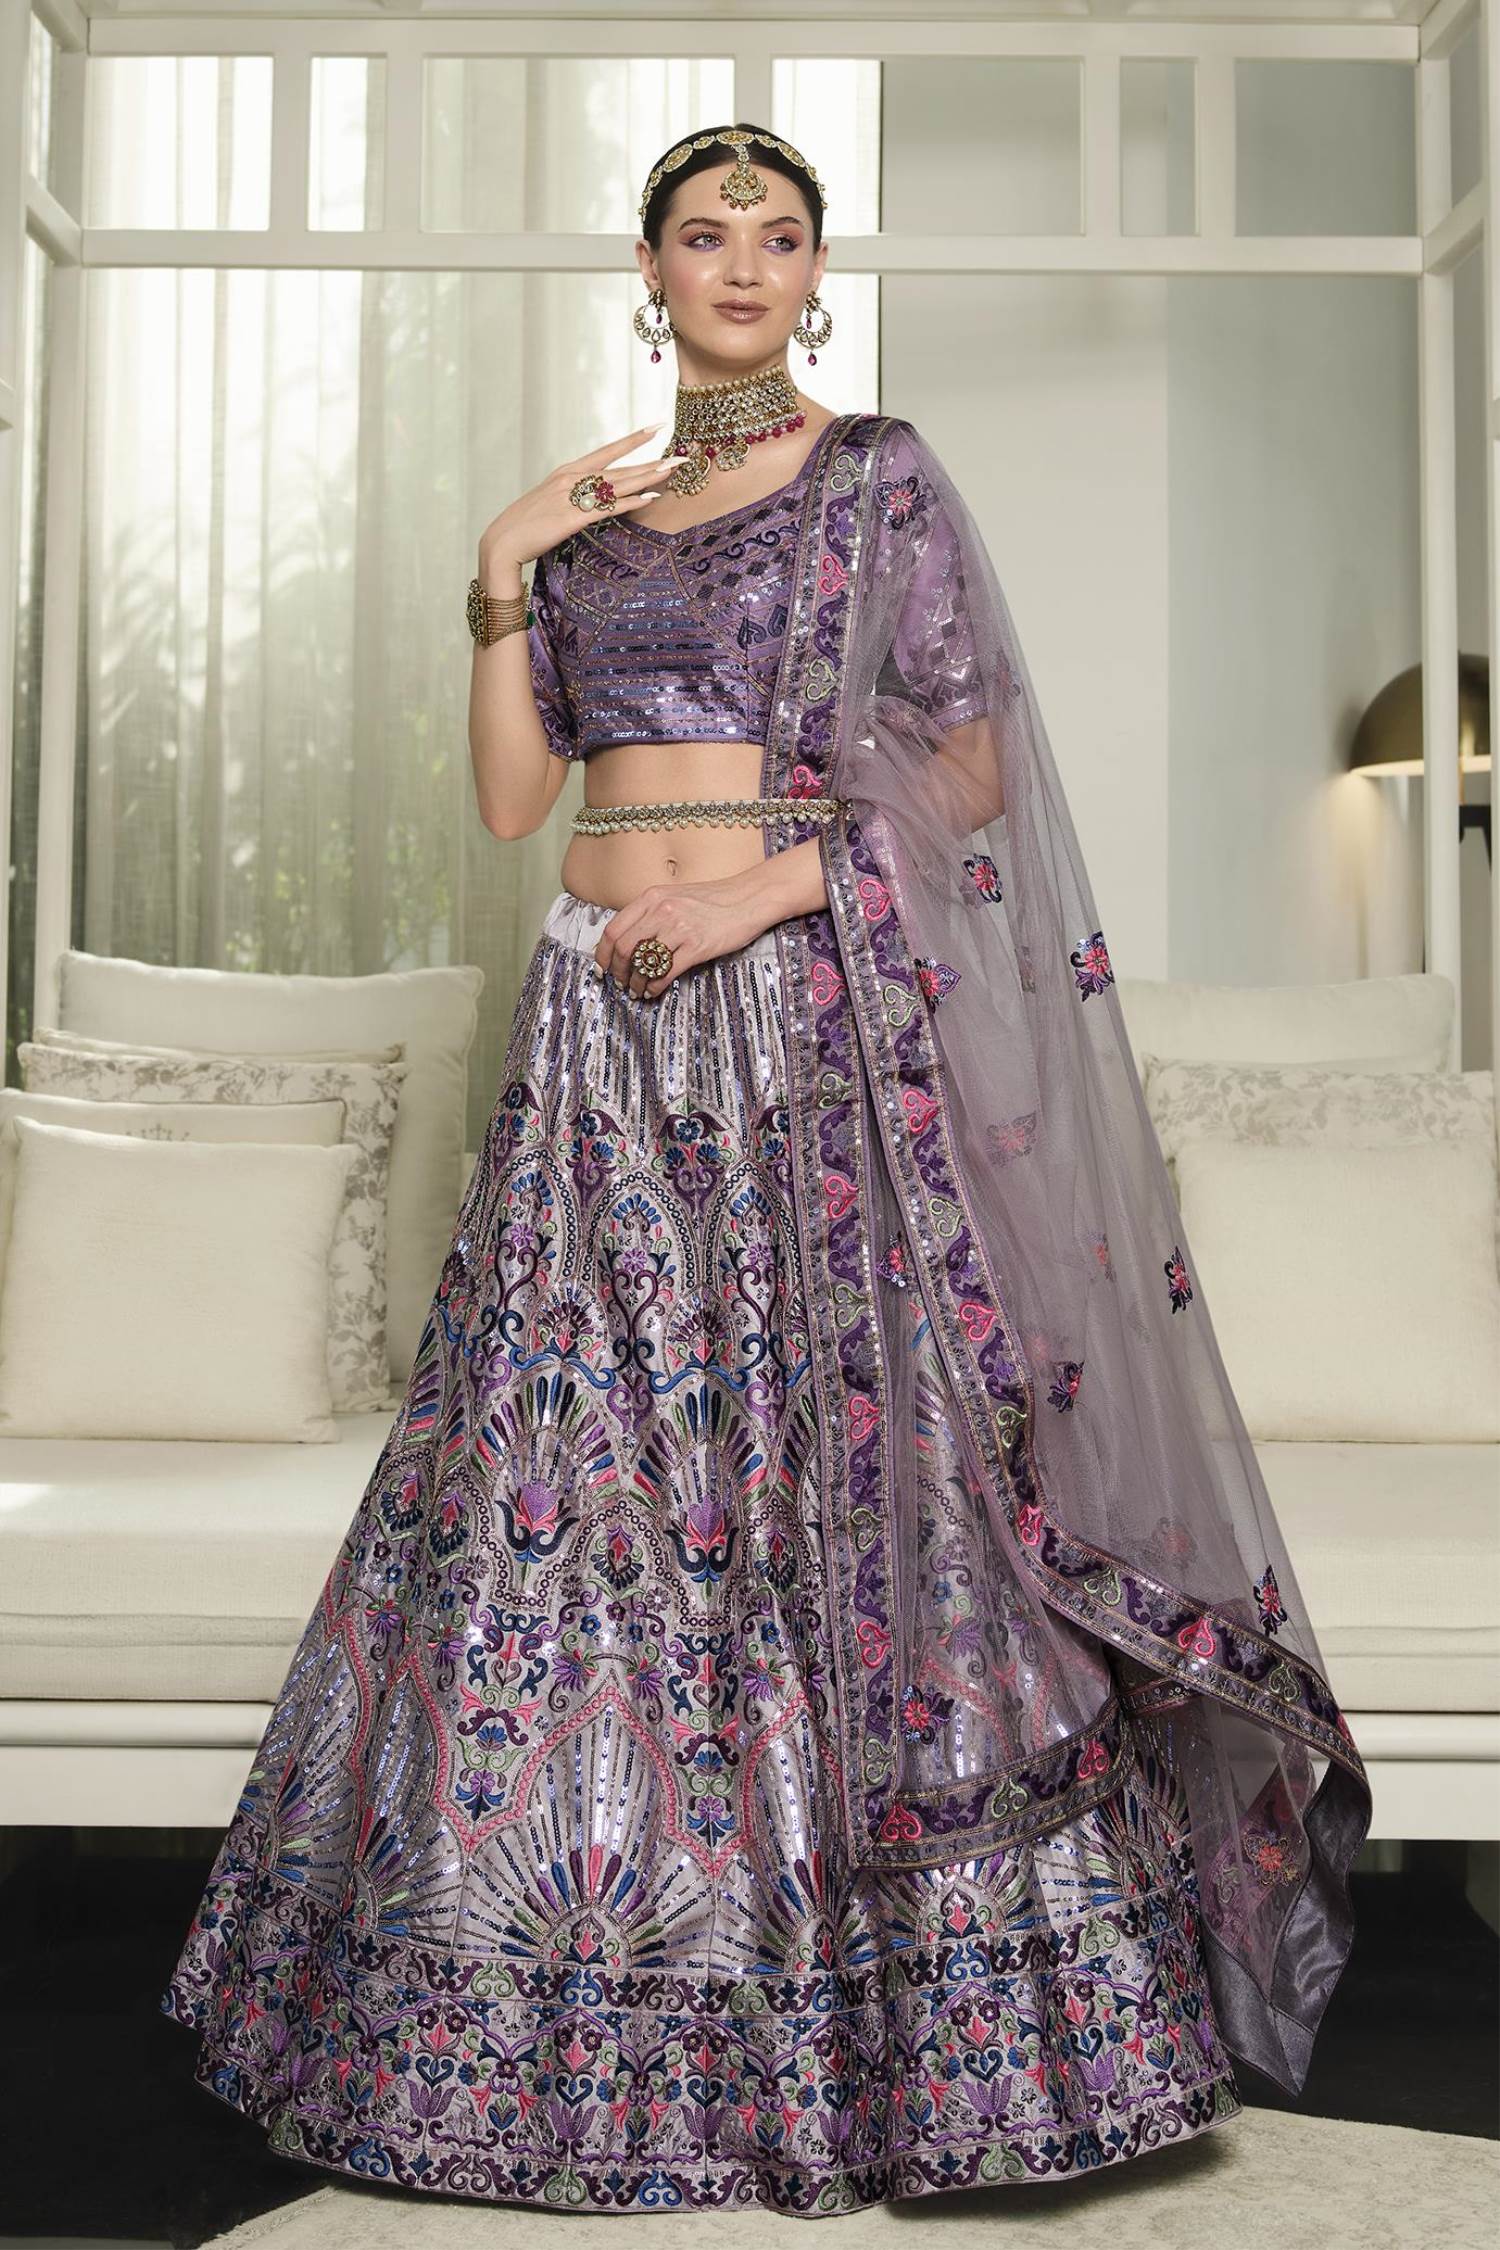 Shop Silver Lehenga for Women Online from India's Luxury Designers 2024